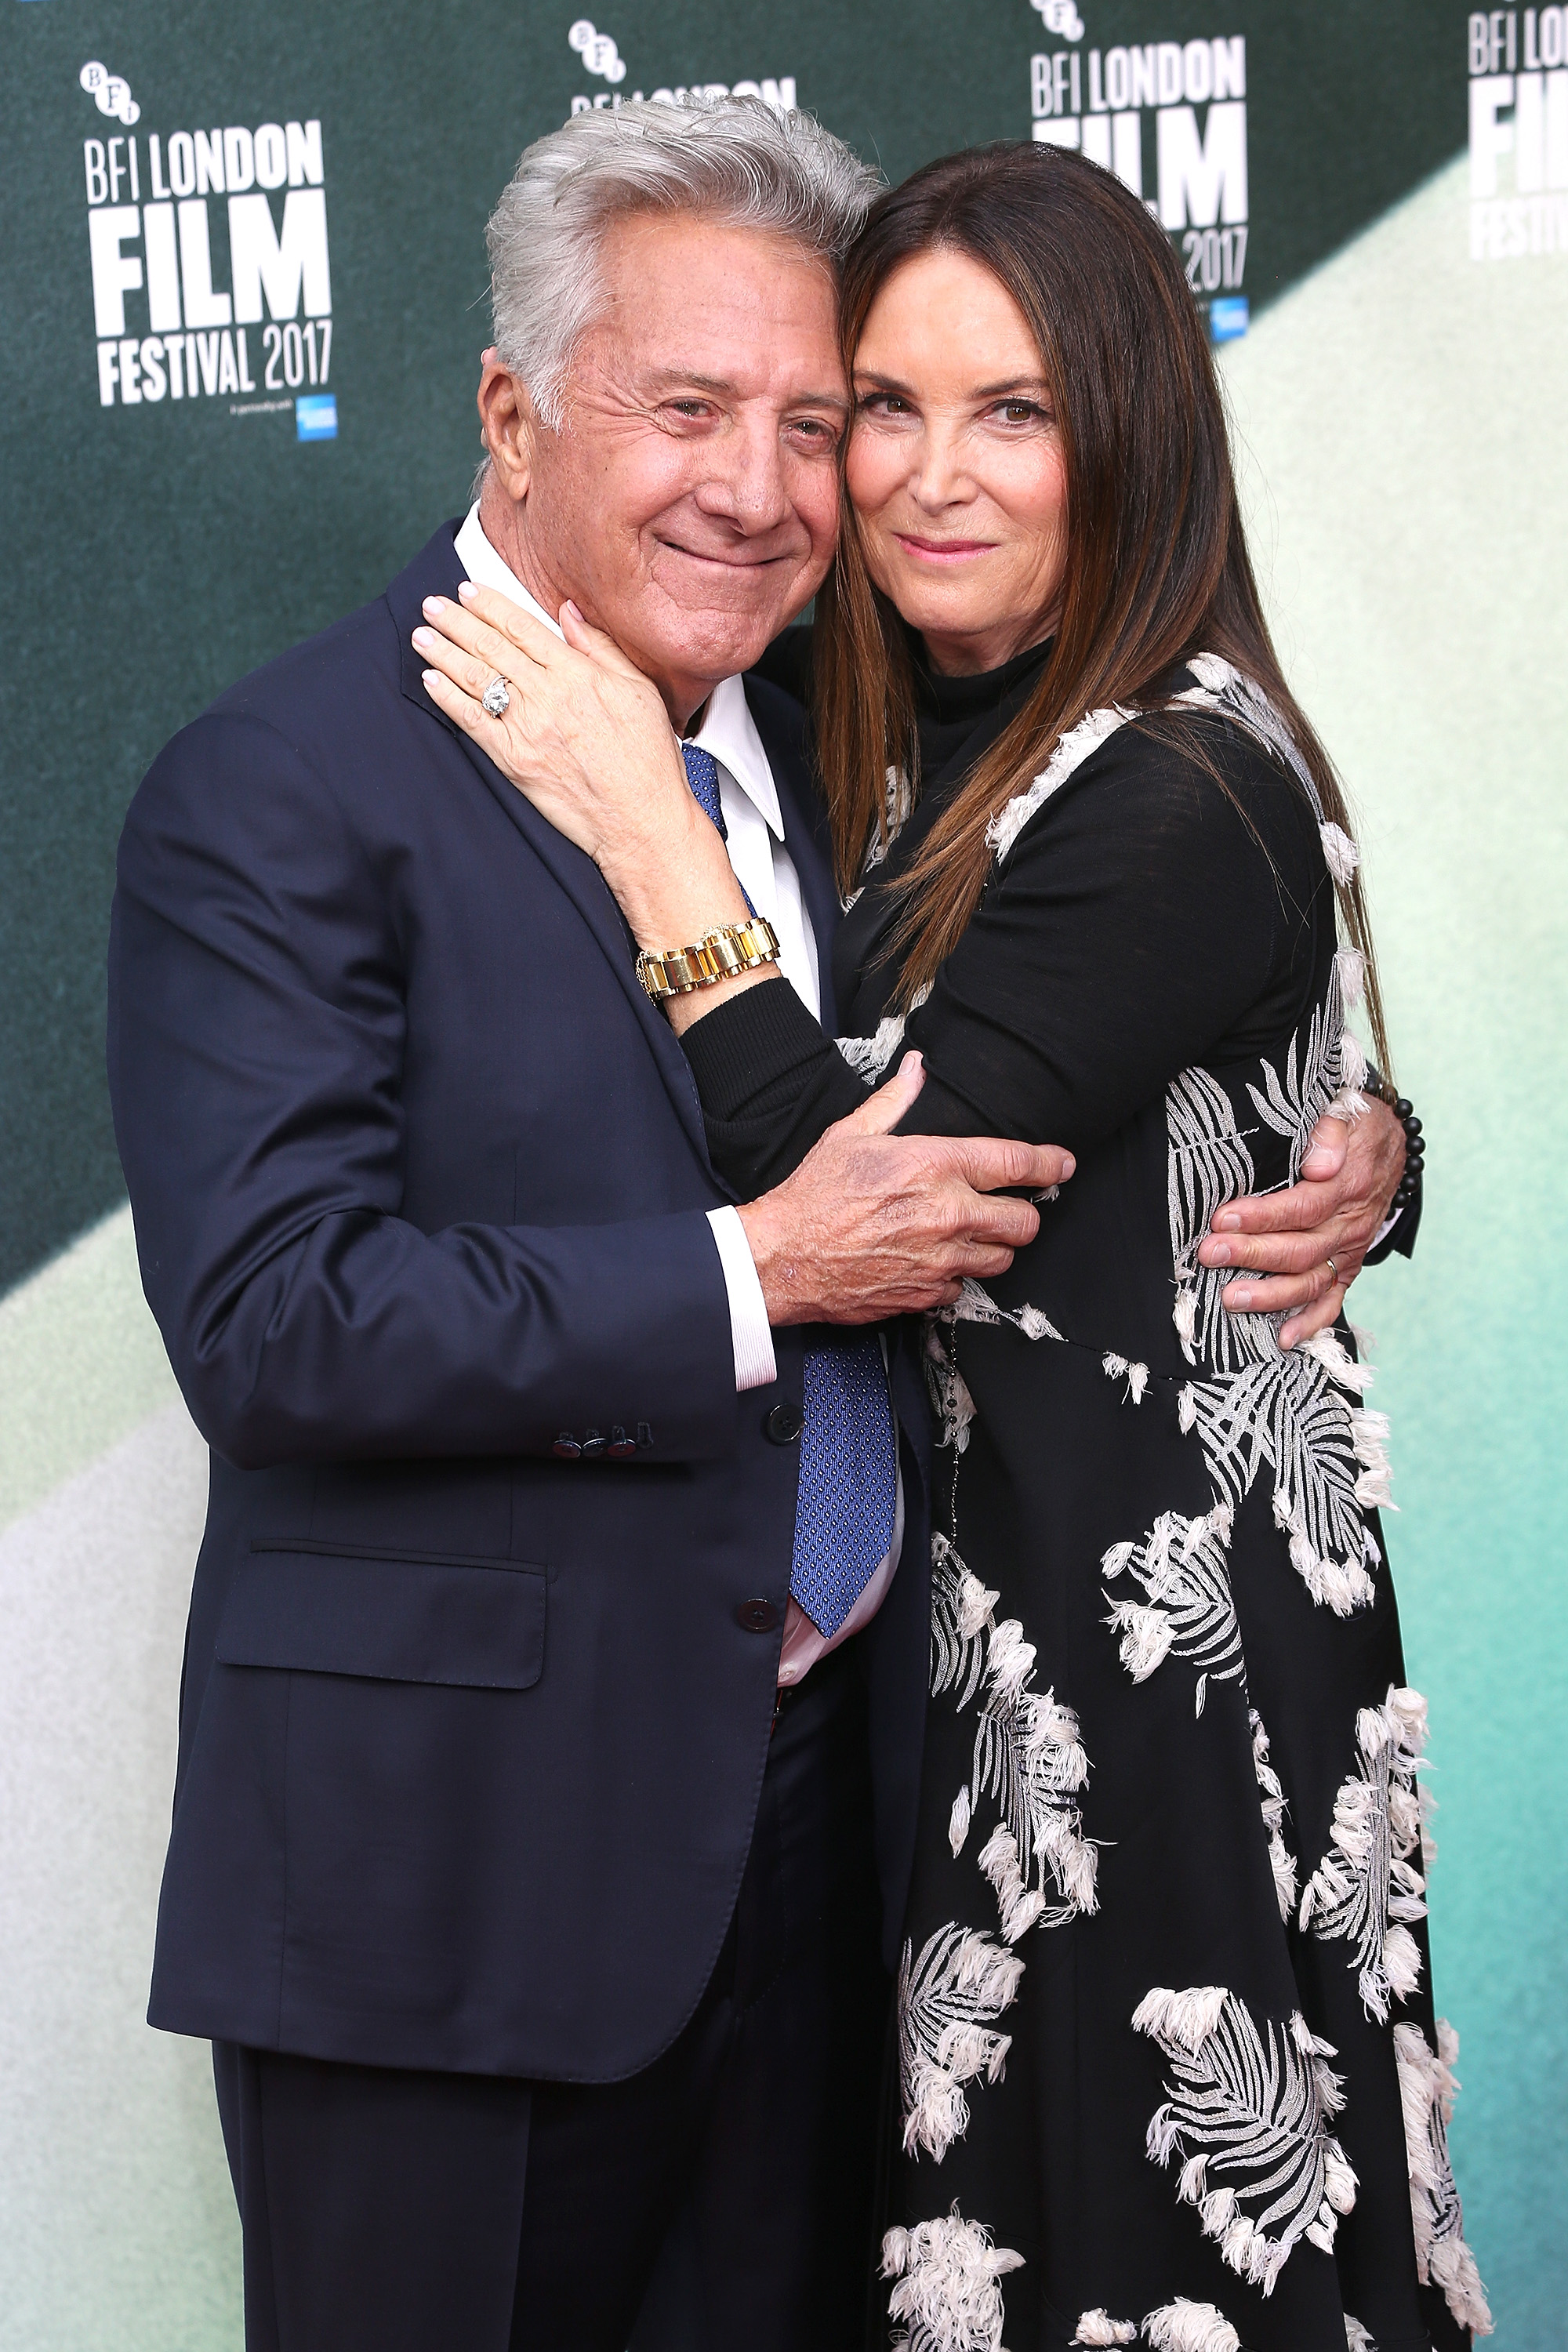 Dustin Hoffman and Lisa Hoffman attend "The Meyerowitz Stories" UK premiere in London, England on October 6, 2017. | Source: Getty Images